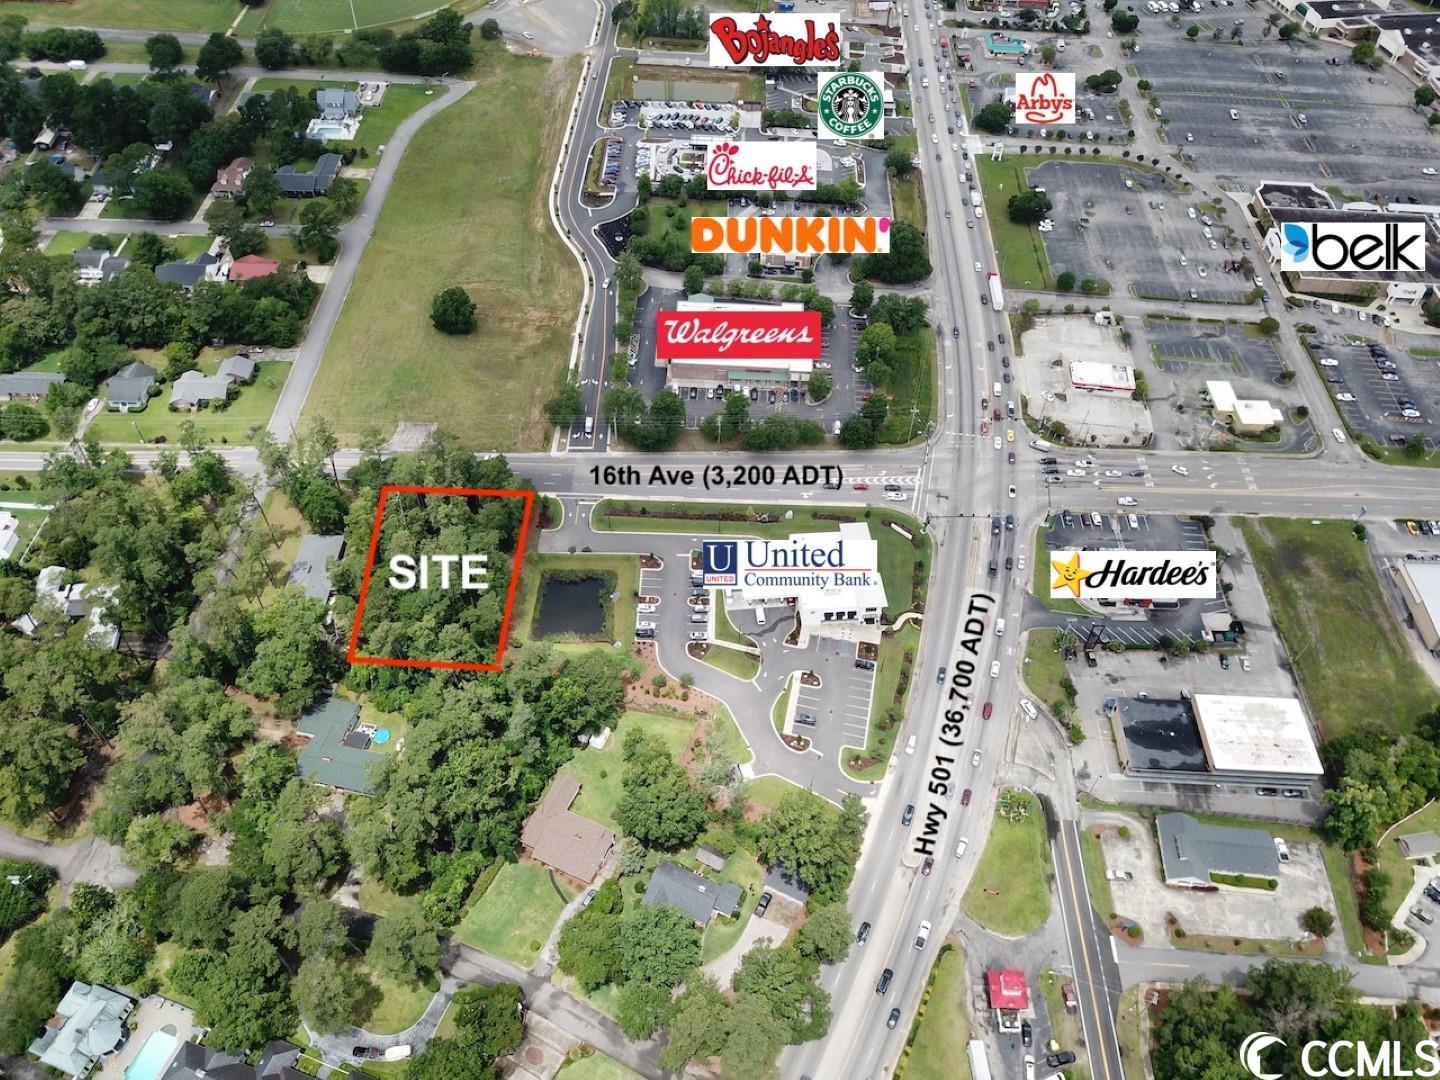 available for ground lease or build to suit:  0.52 acre pad site with 112' frontage on 16th ave.  excellent location adjacent to united community bank.  cross access easement in place from hwy 501 through the united community bank site.  master planned stormwater retention and utilities in place.   other businesses in the immediate area include:  walgreens, dunkin, chick fil a, bojangles, starbucks, popeyes, hardees, arby's, kfc, conway sports and fitness center, etc.  adt on hwy 501 (church st) is 36,700.  adt on 16th ave is 3,200. measurements are approximate and not guaranteed. buyer responsible for verification.